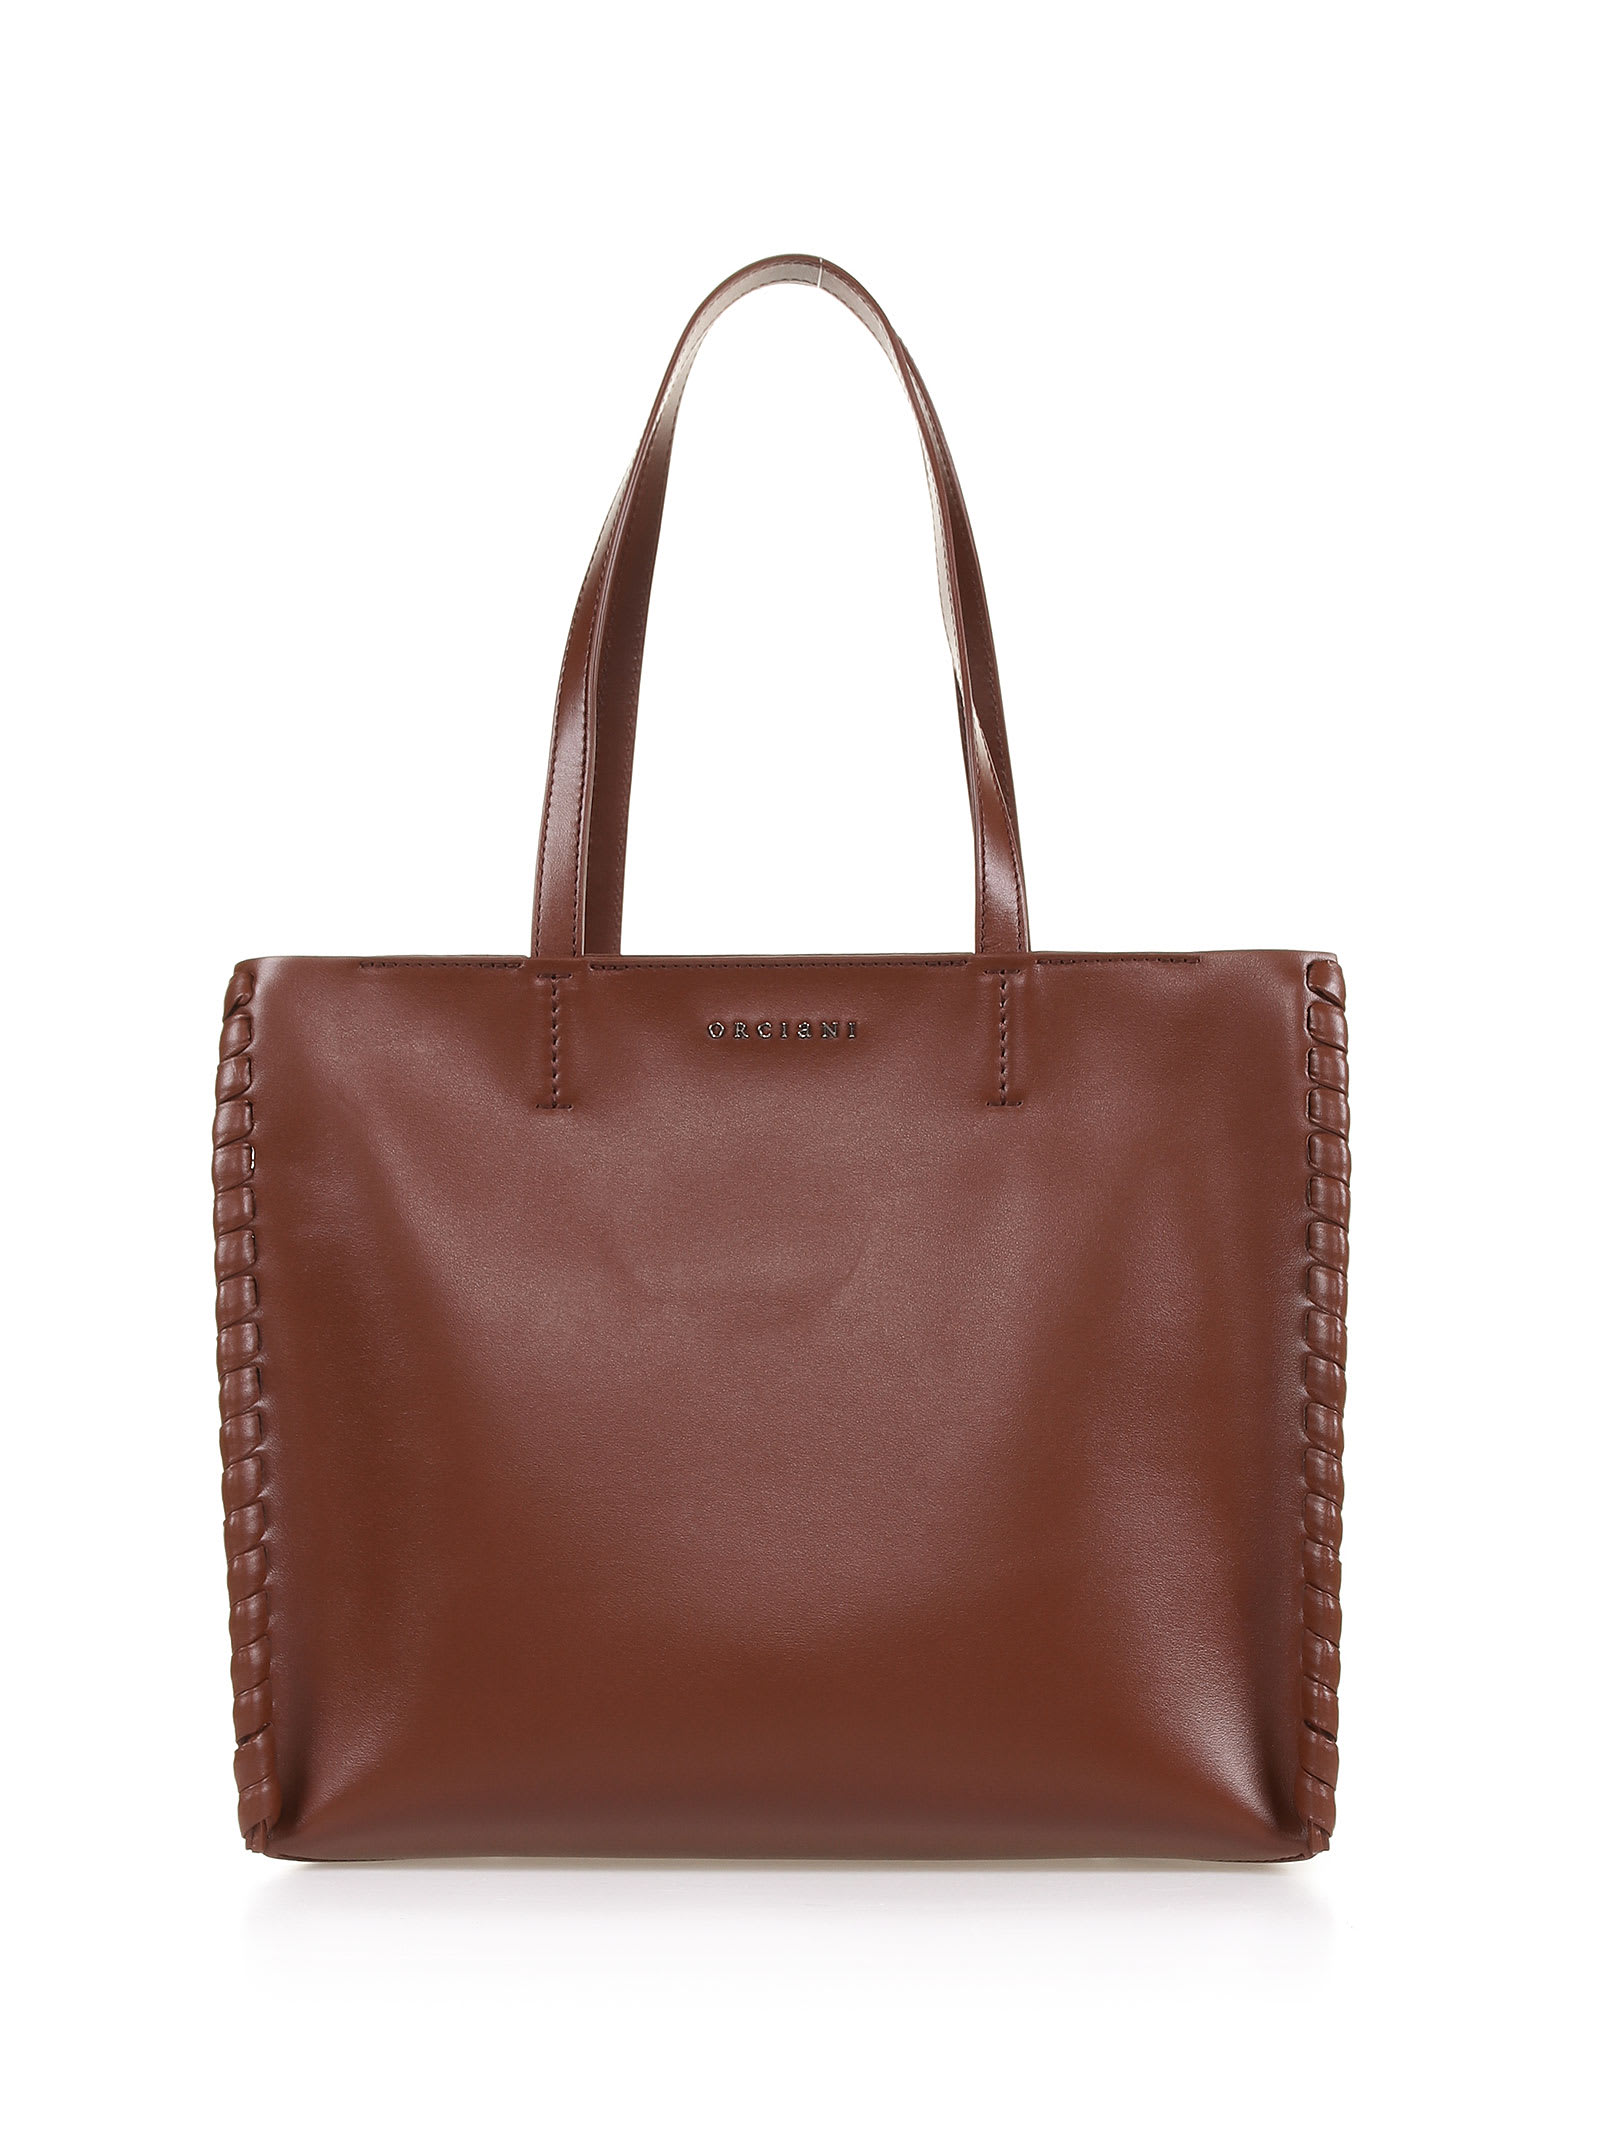 Orciani Sequoia Shopping Bag